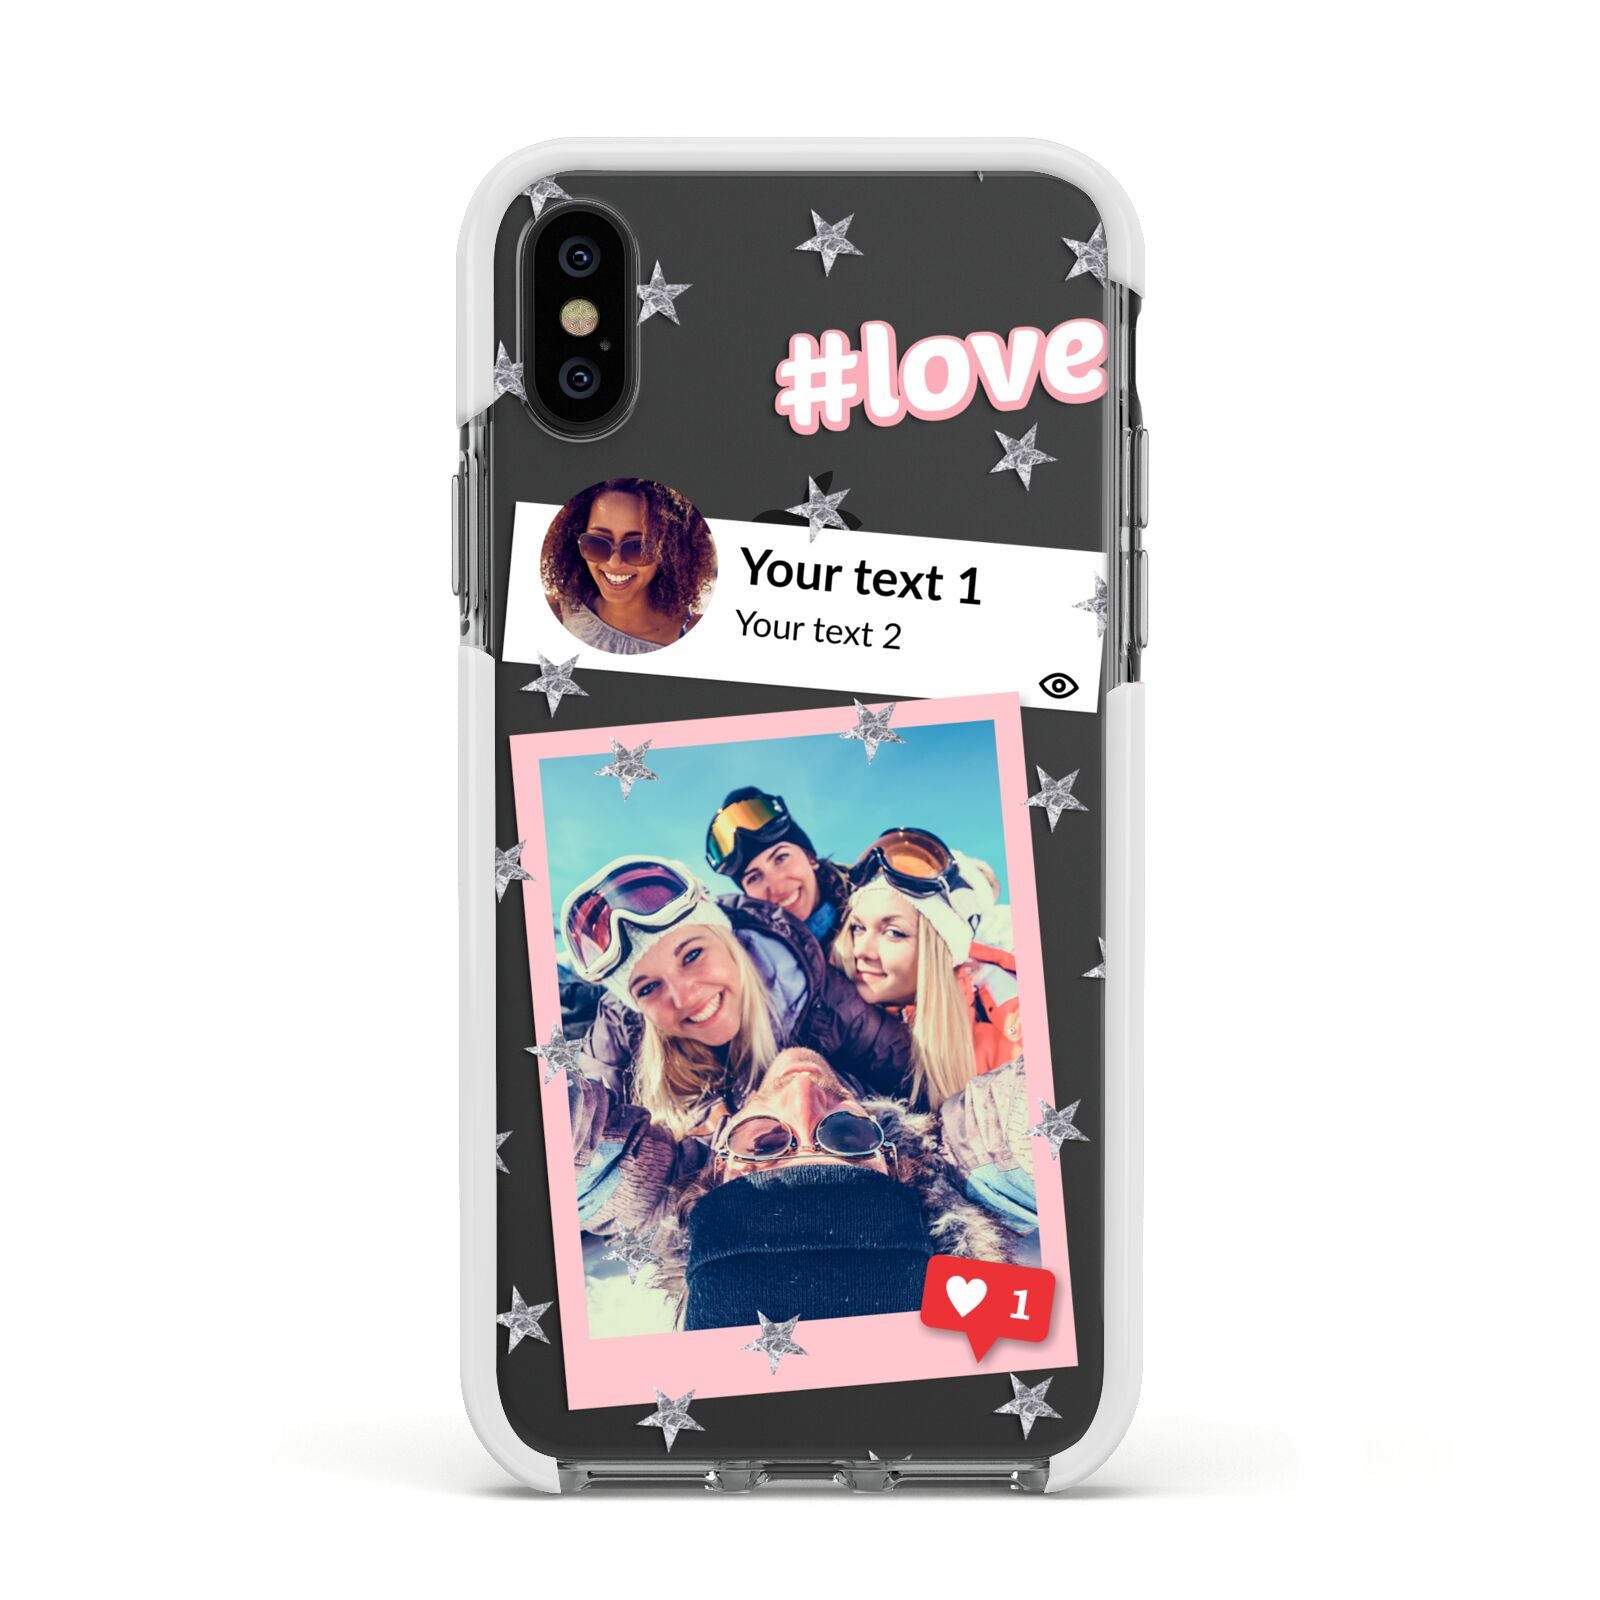 Starry Social Media Photo Montage Upload with Text Apple iPhone Xs Impact Case White Edge on Black Phone